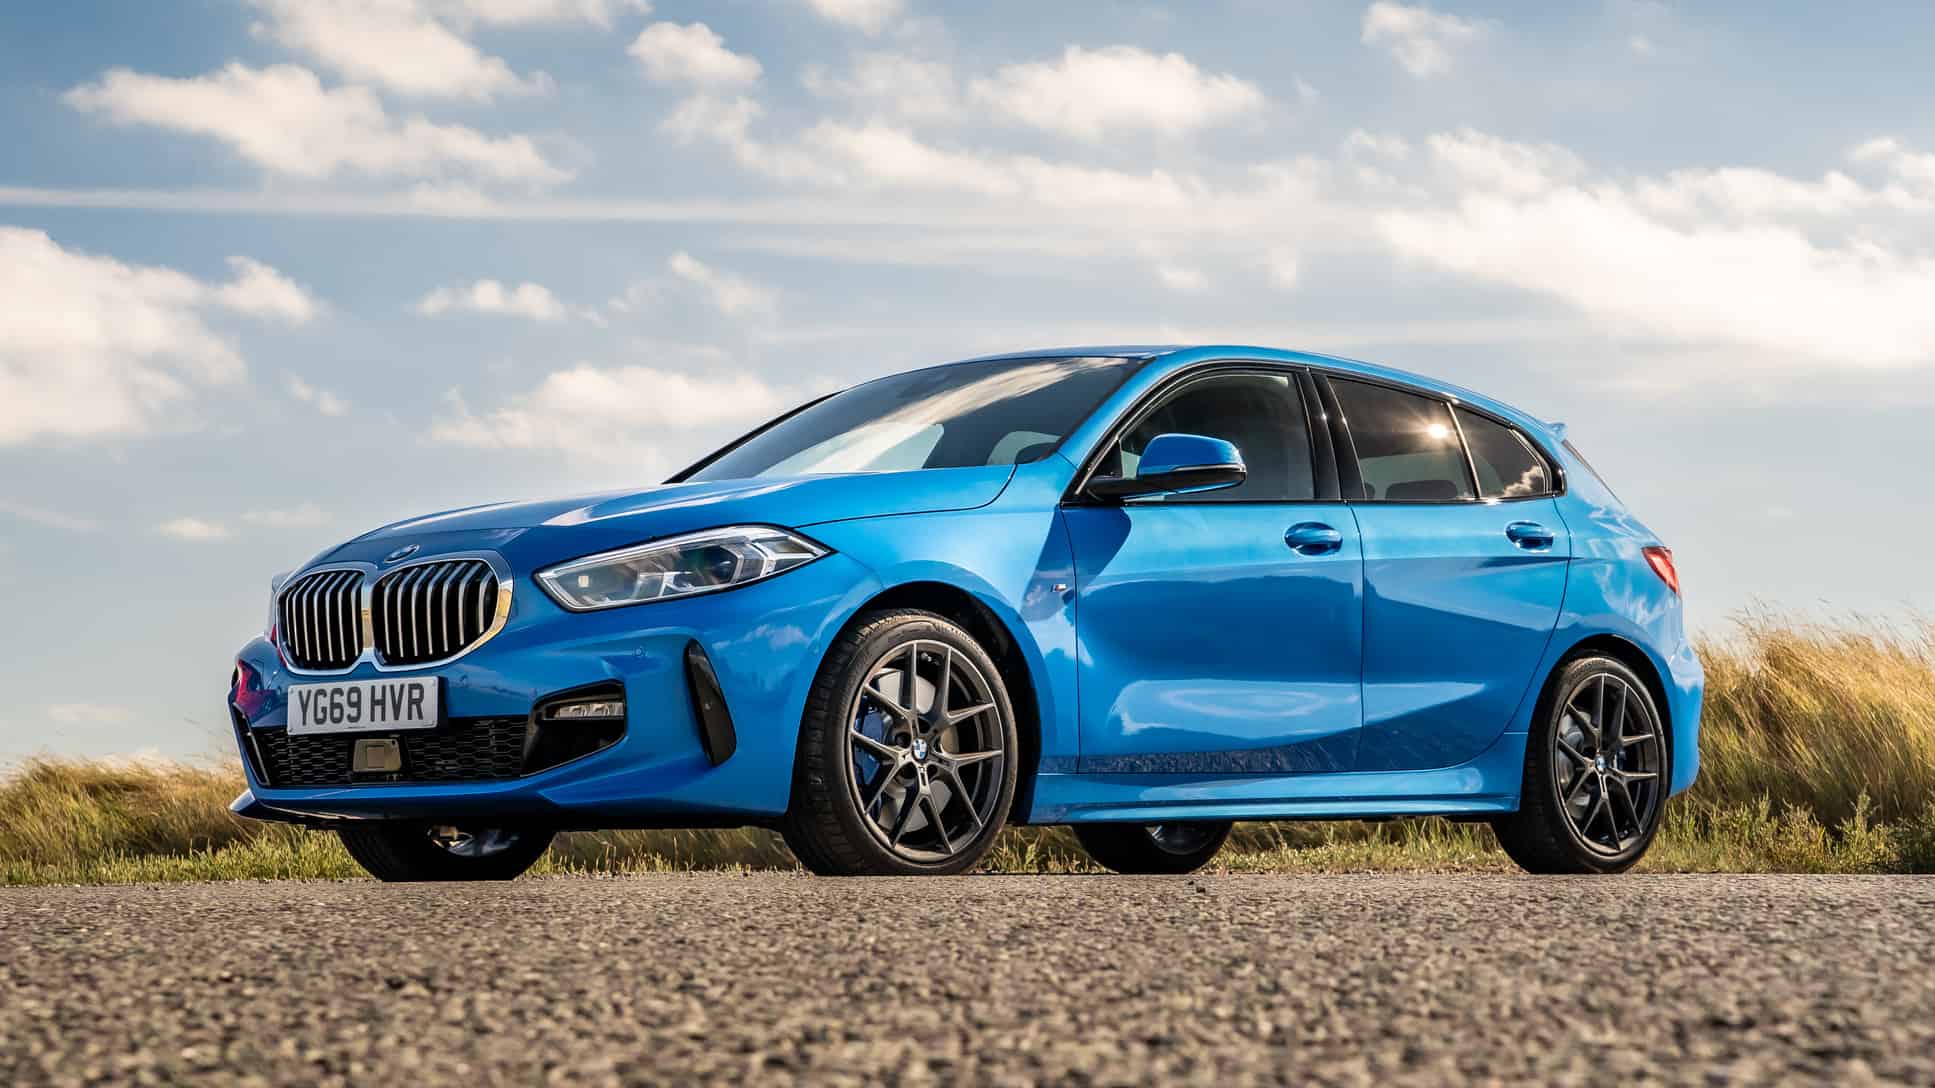 BMW 1 Series: A dynamic compact car epitomizing performance and luxury with iconic design and cutting-edge features.